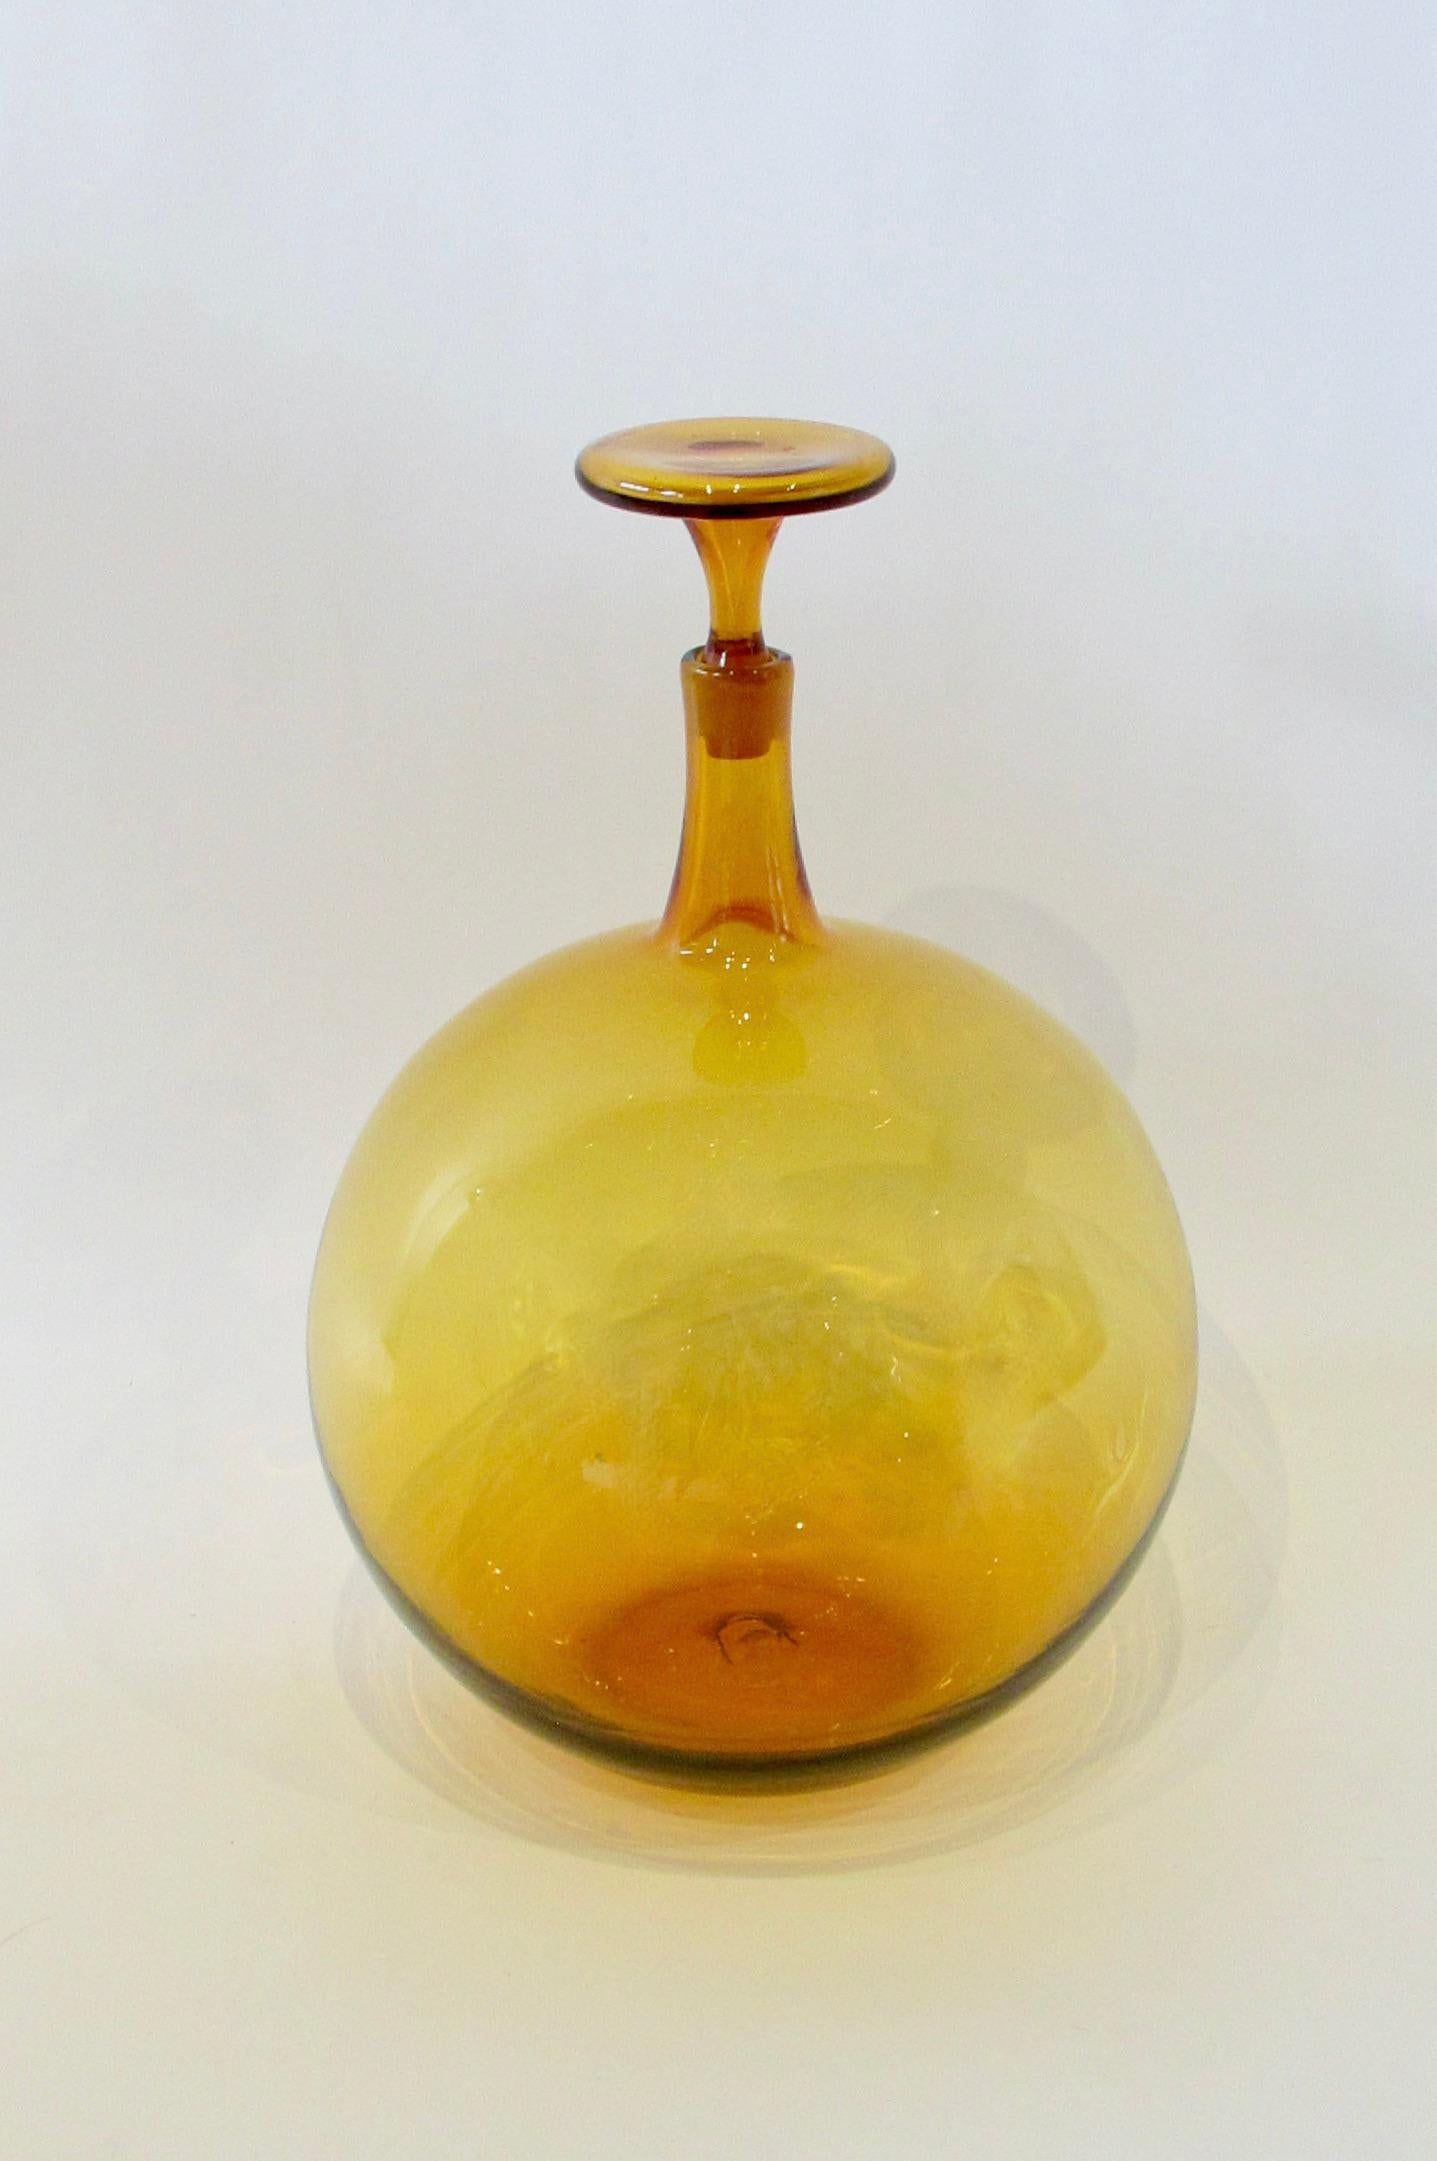 Large amber ball shape body bottle with stopper . Rare form I have never seen before . Bottle is 17.5